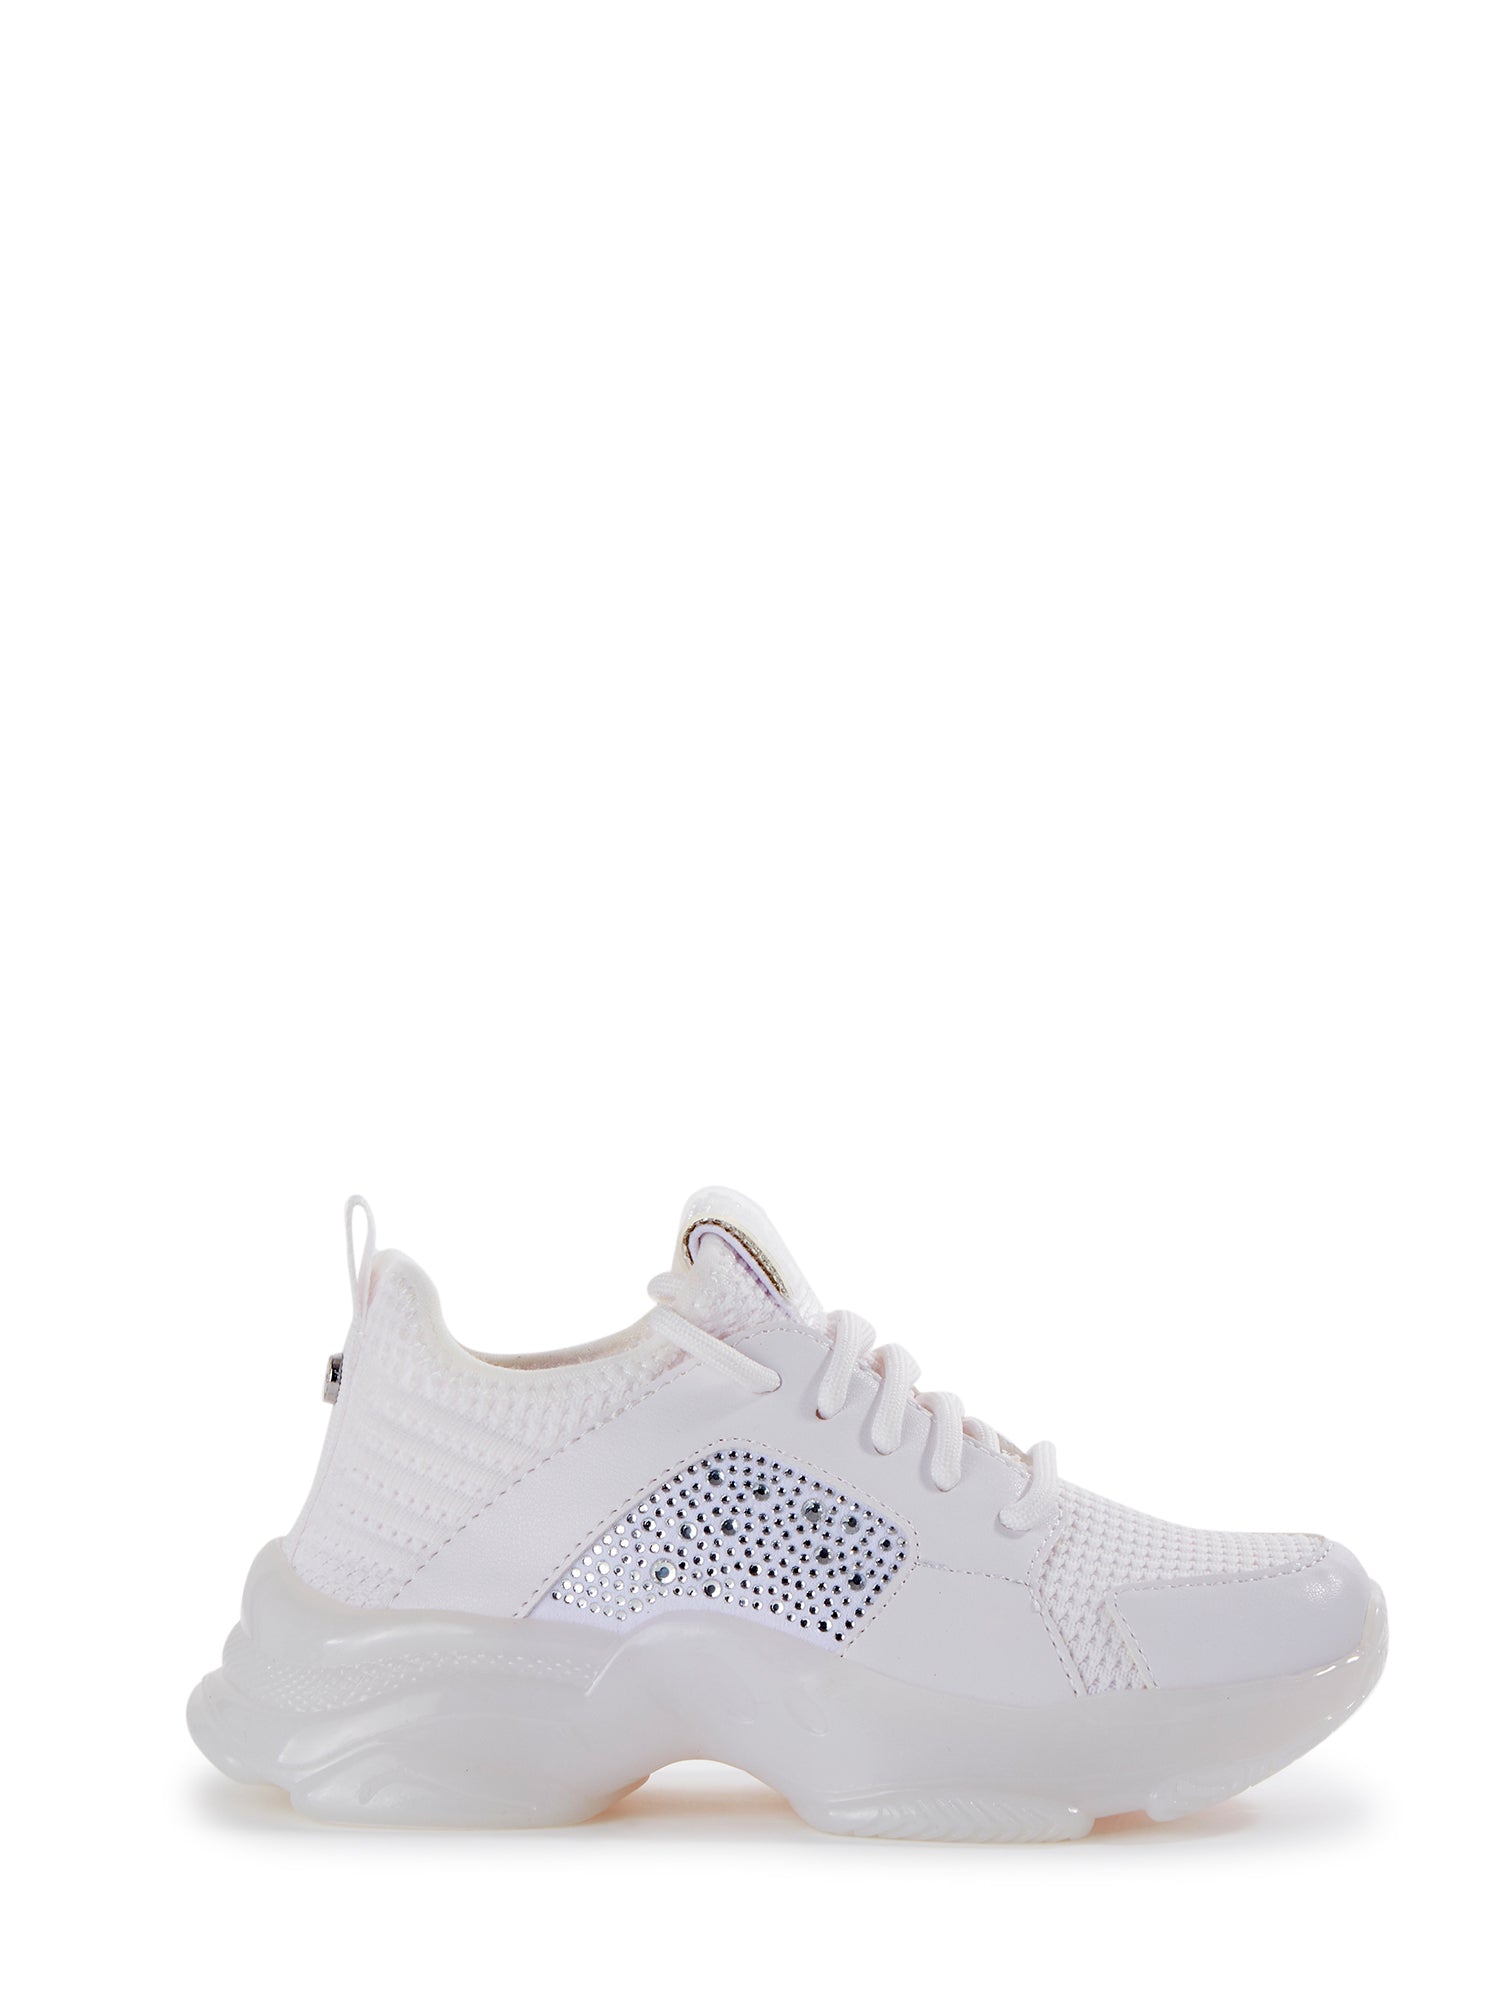 MADDEN NYC EMBELLISHED ELASTIC SNEAKERS IN WHITE